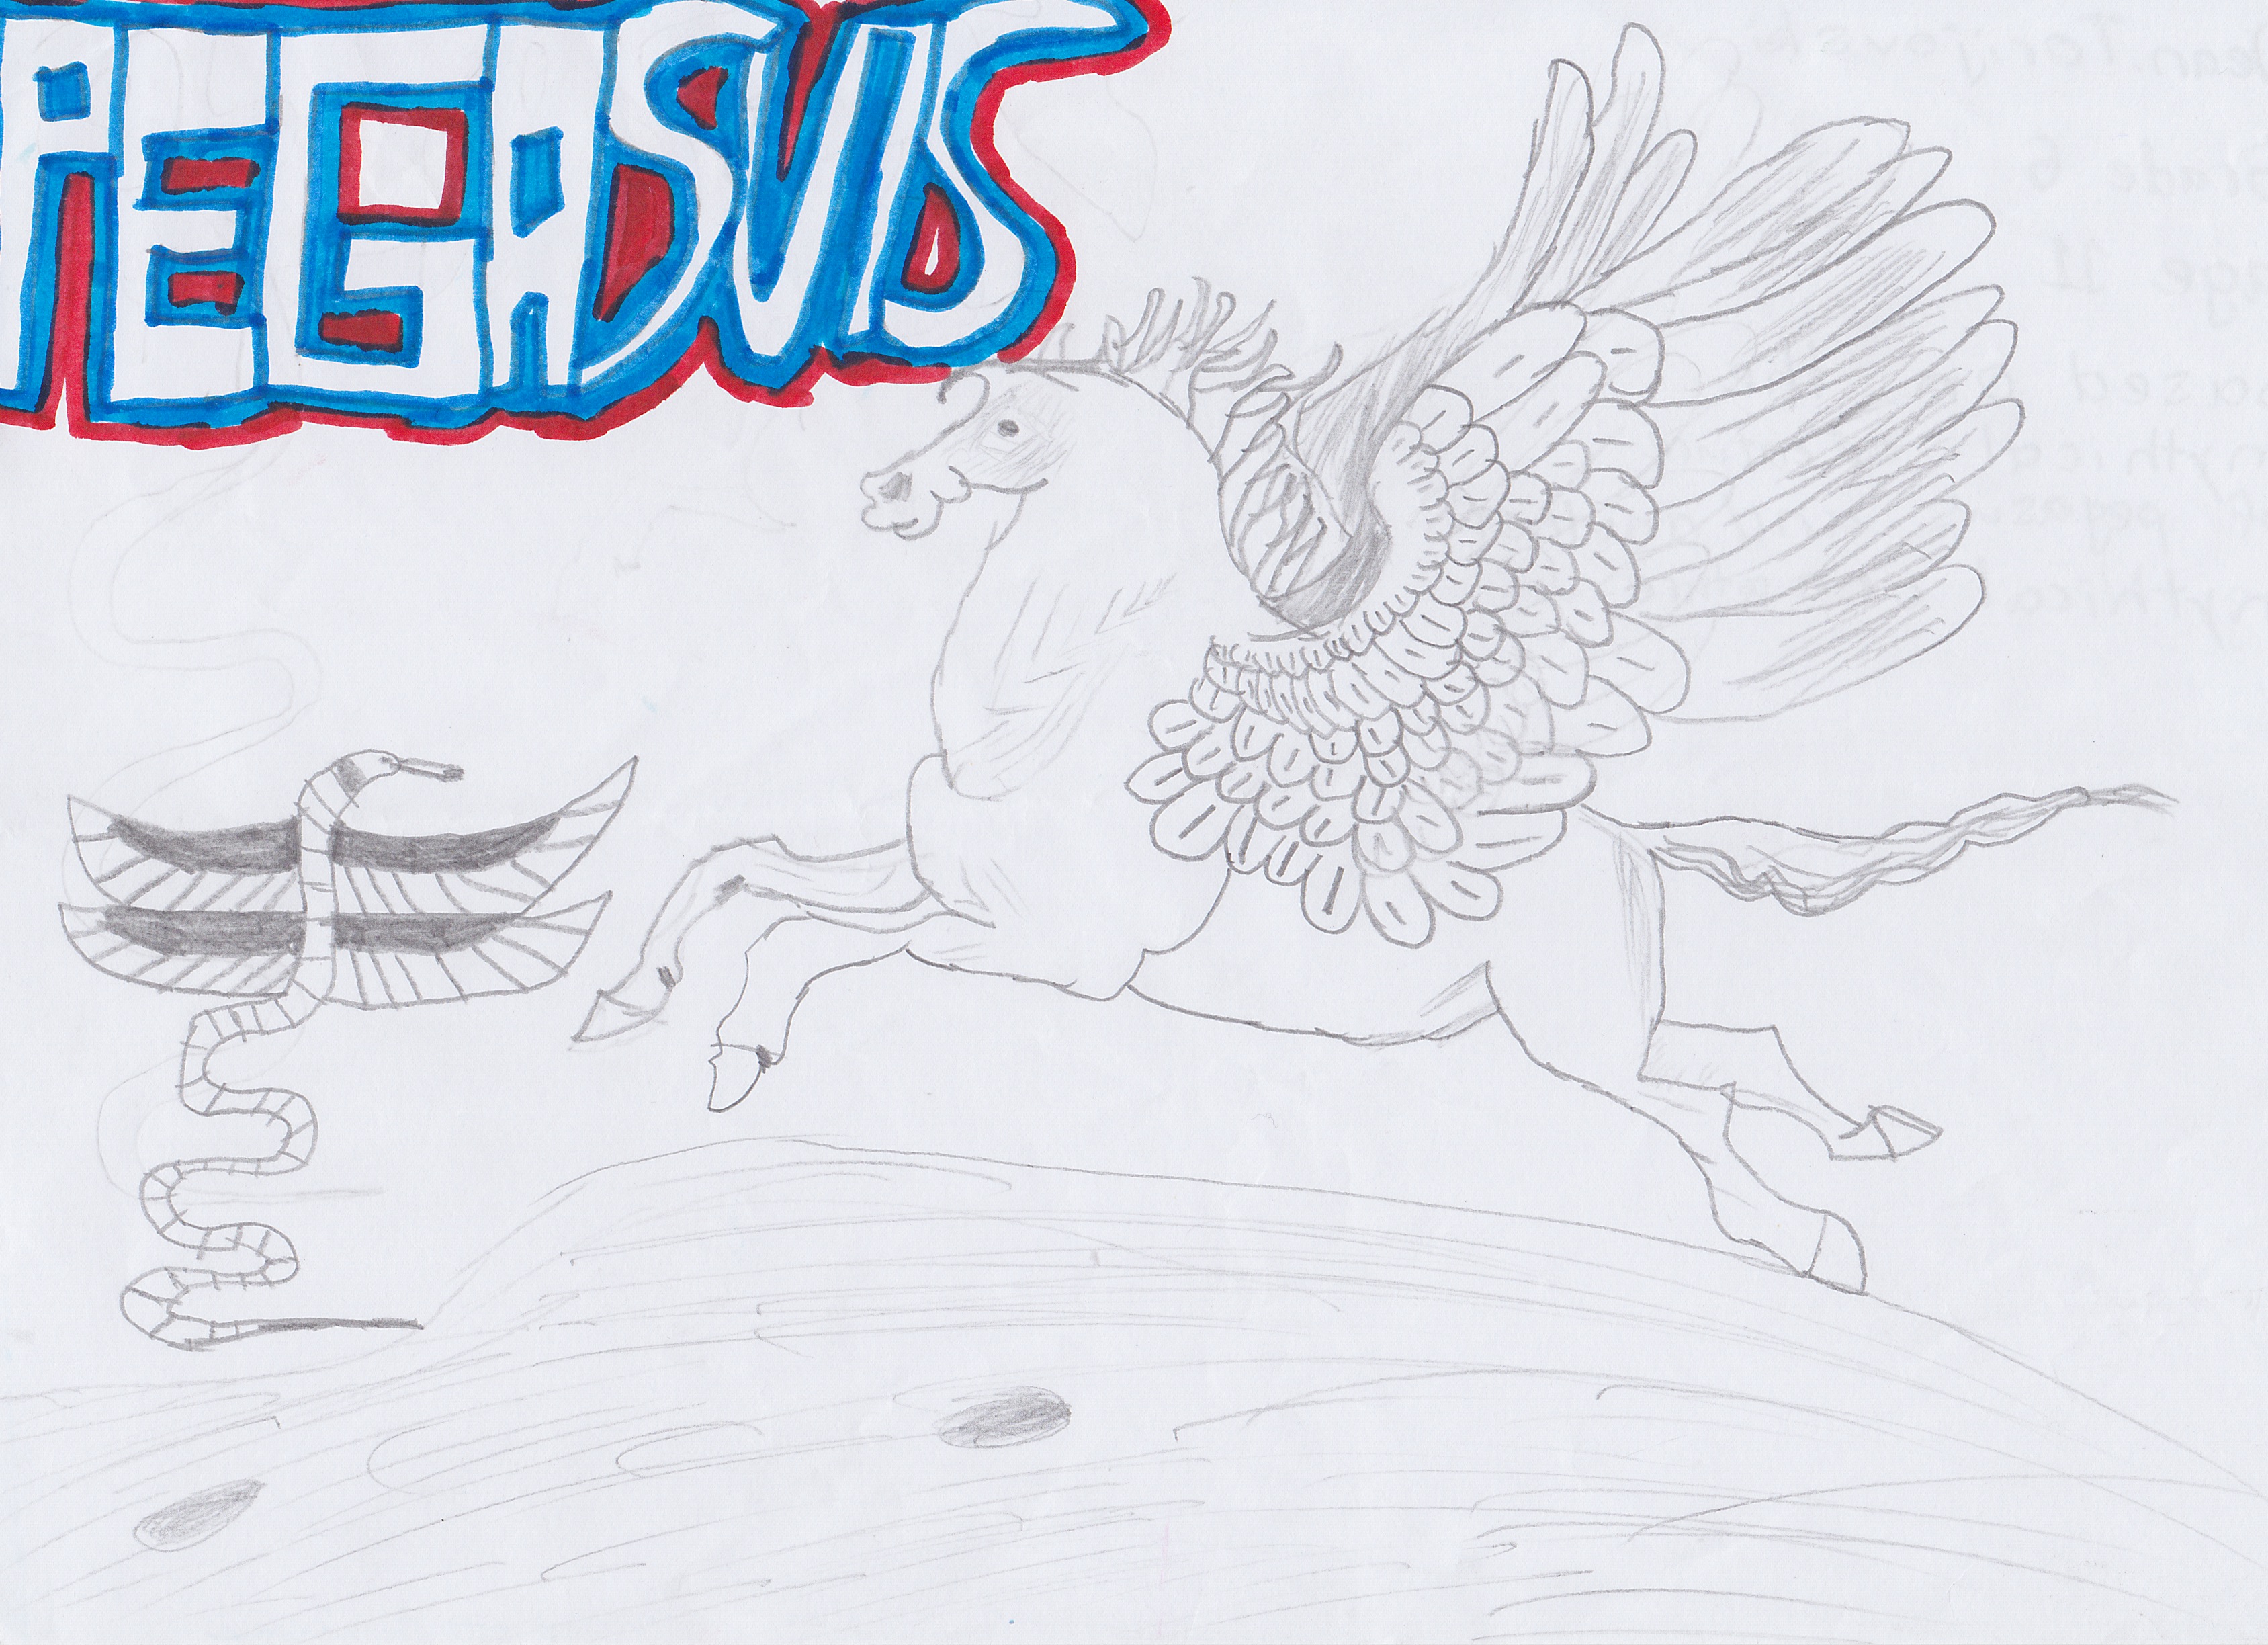 Mythical Creature Of Pegasus And Another Mythical Creature